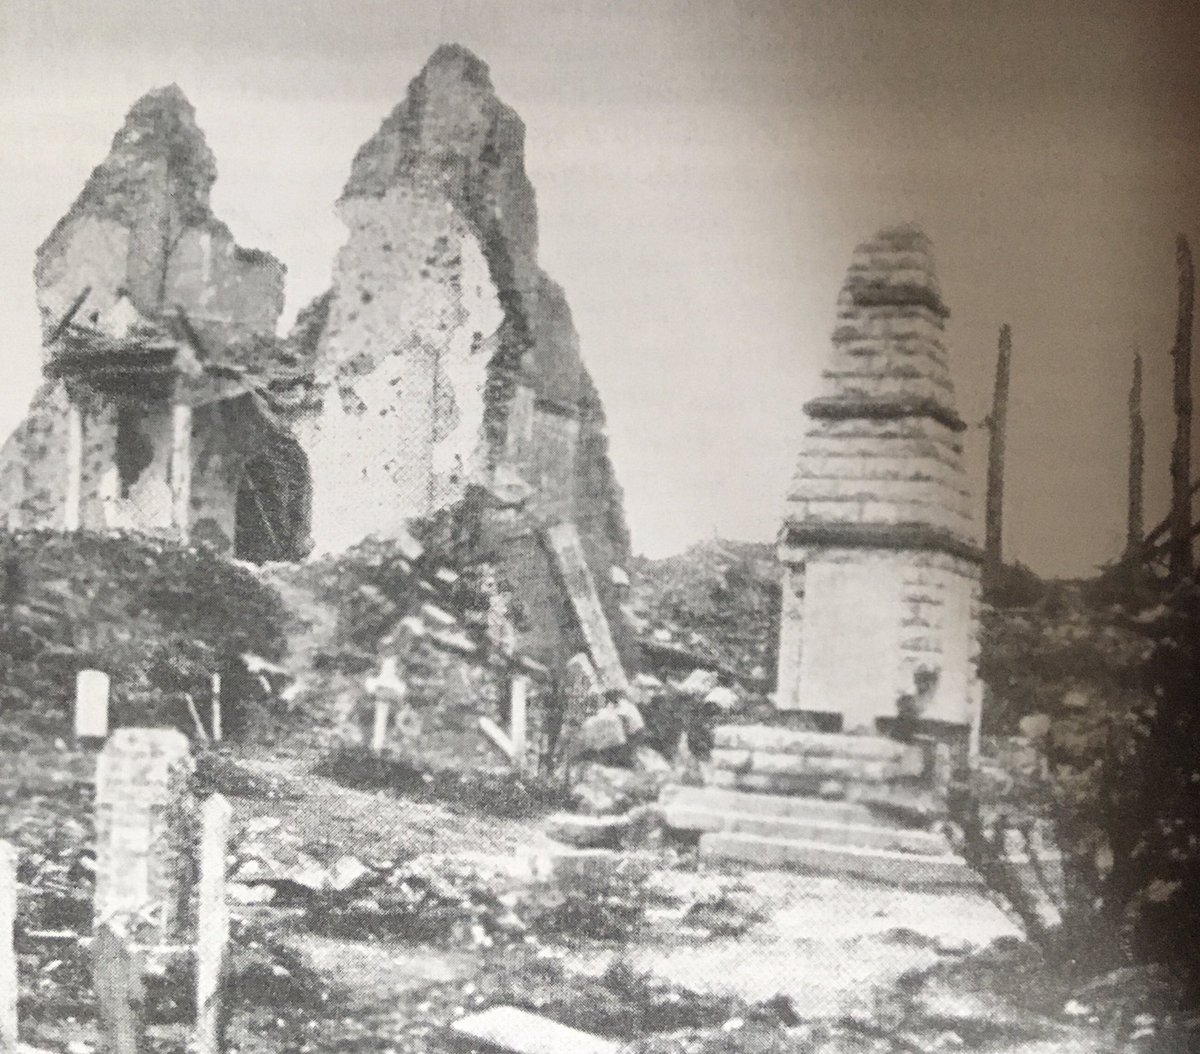 As I stated the memorial, graves and surrounding buildings and church were destroyed by shell fire as the battle raged on and edged ever closer to Miraumont.